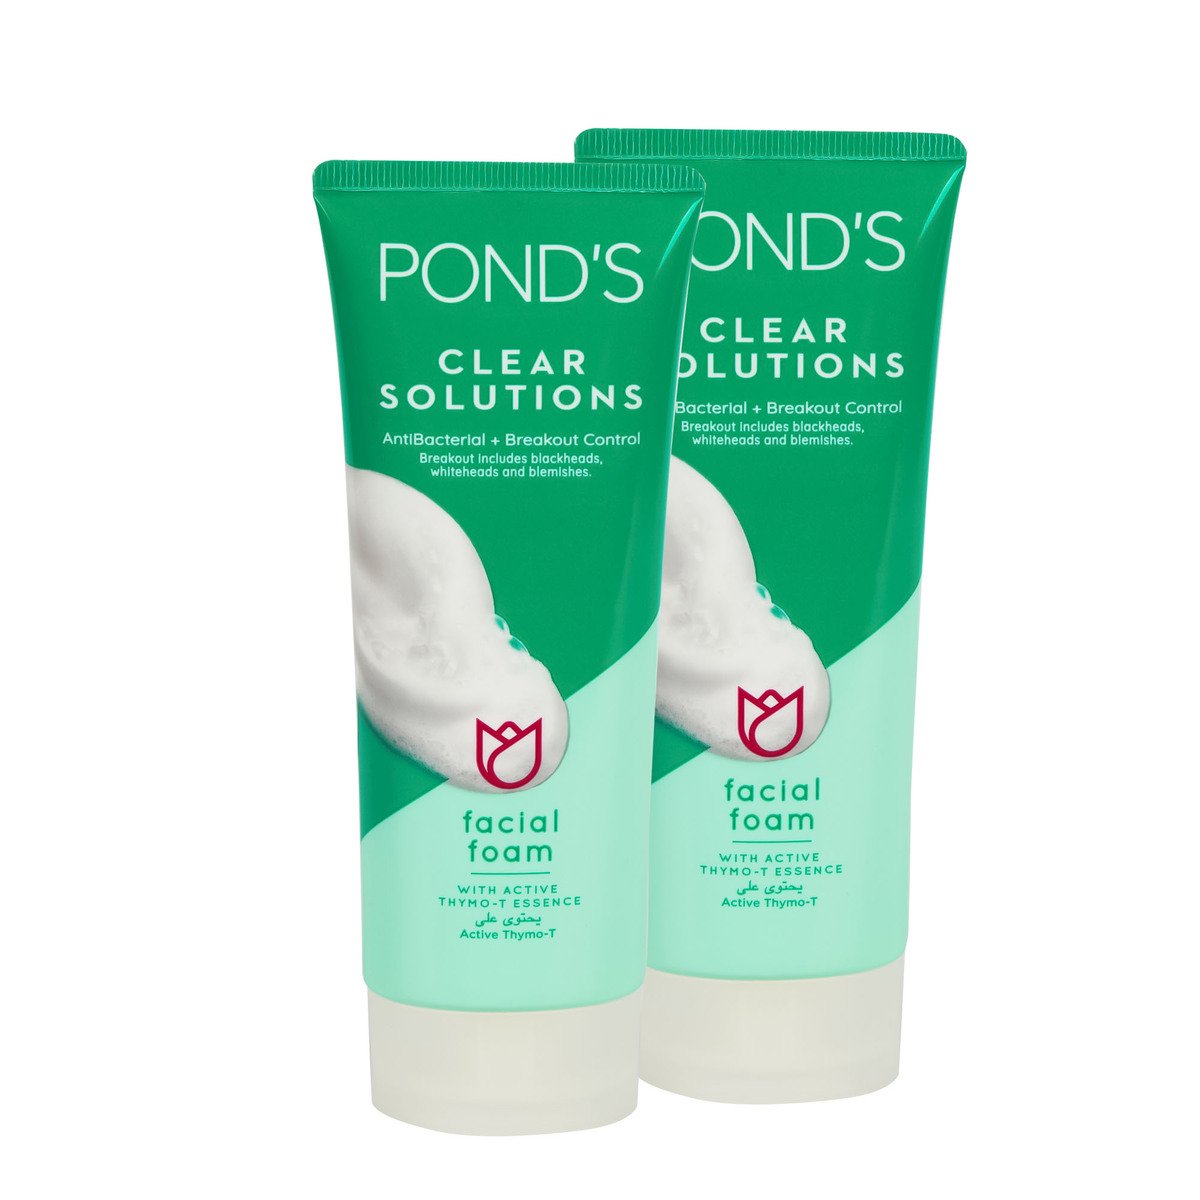 Pond's Clear Solutions Facial Foam With Active Thymo-T Essence 2 x 100g